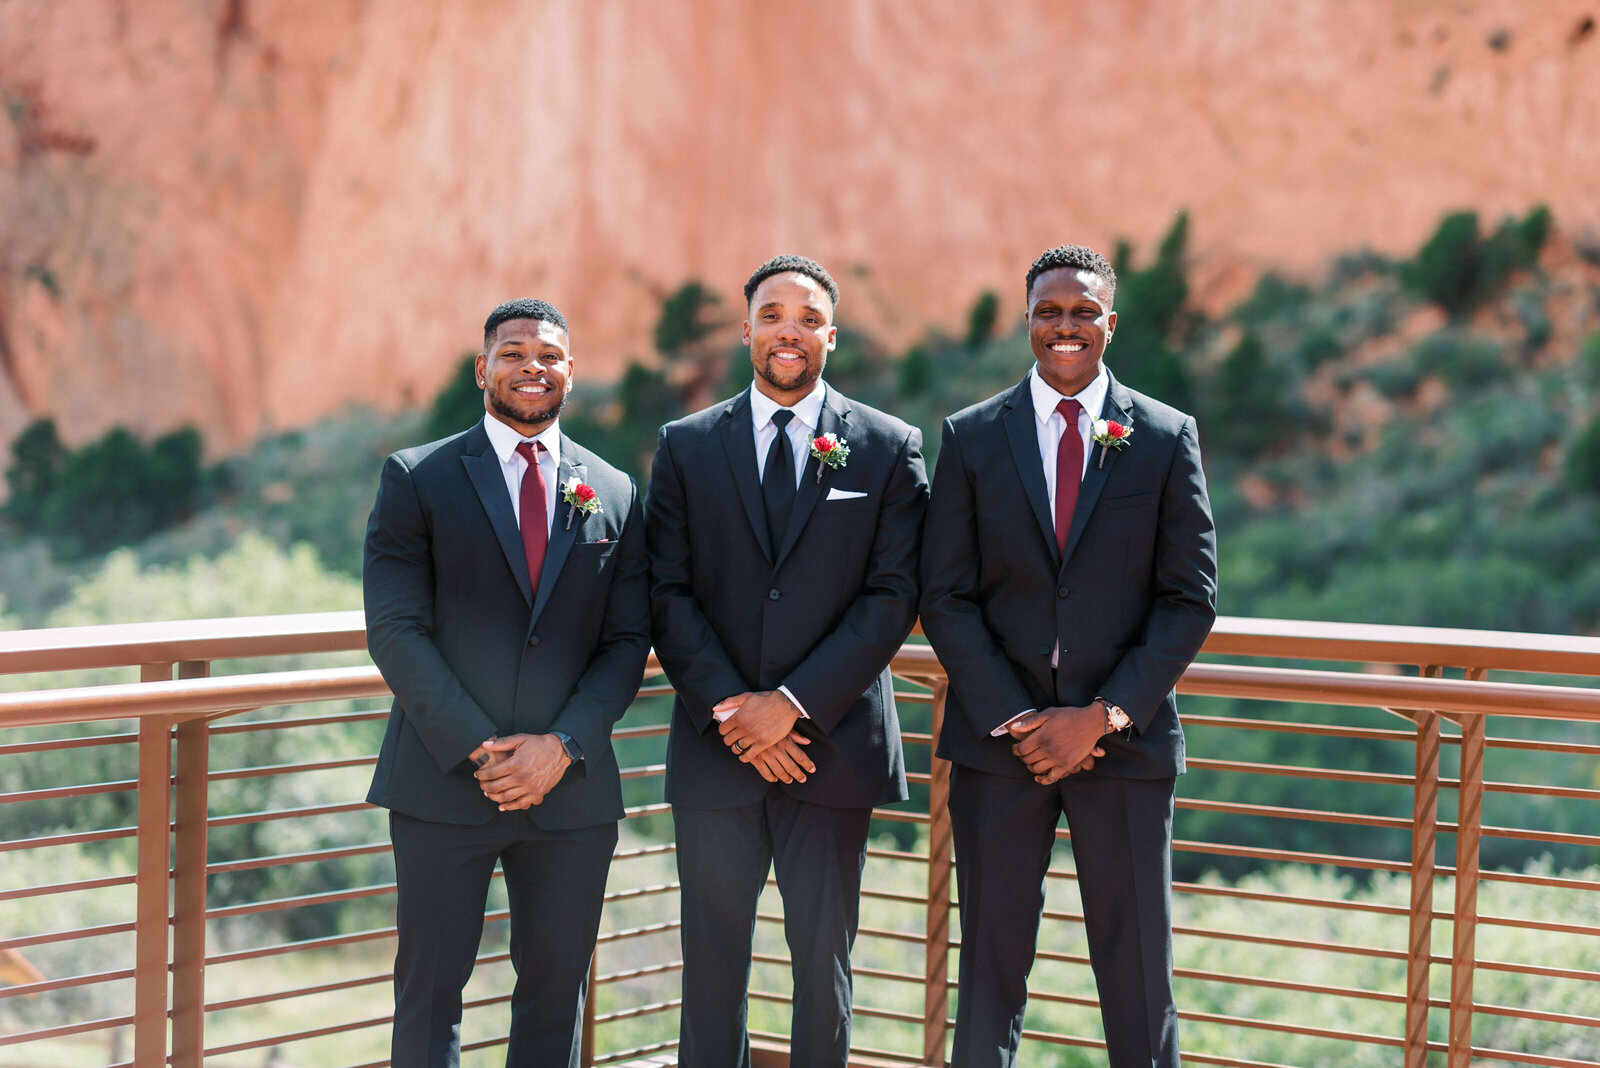 Handsome groom and his groomsmen dressed in black suits stand together and smile at the camera